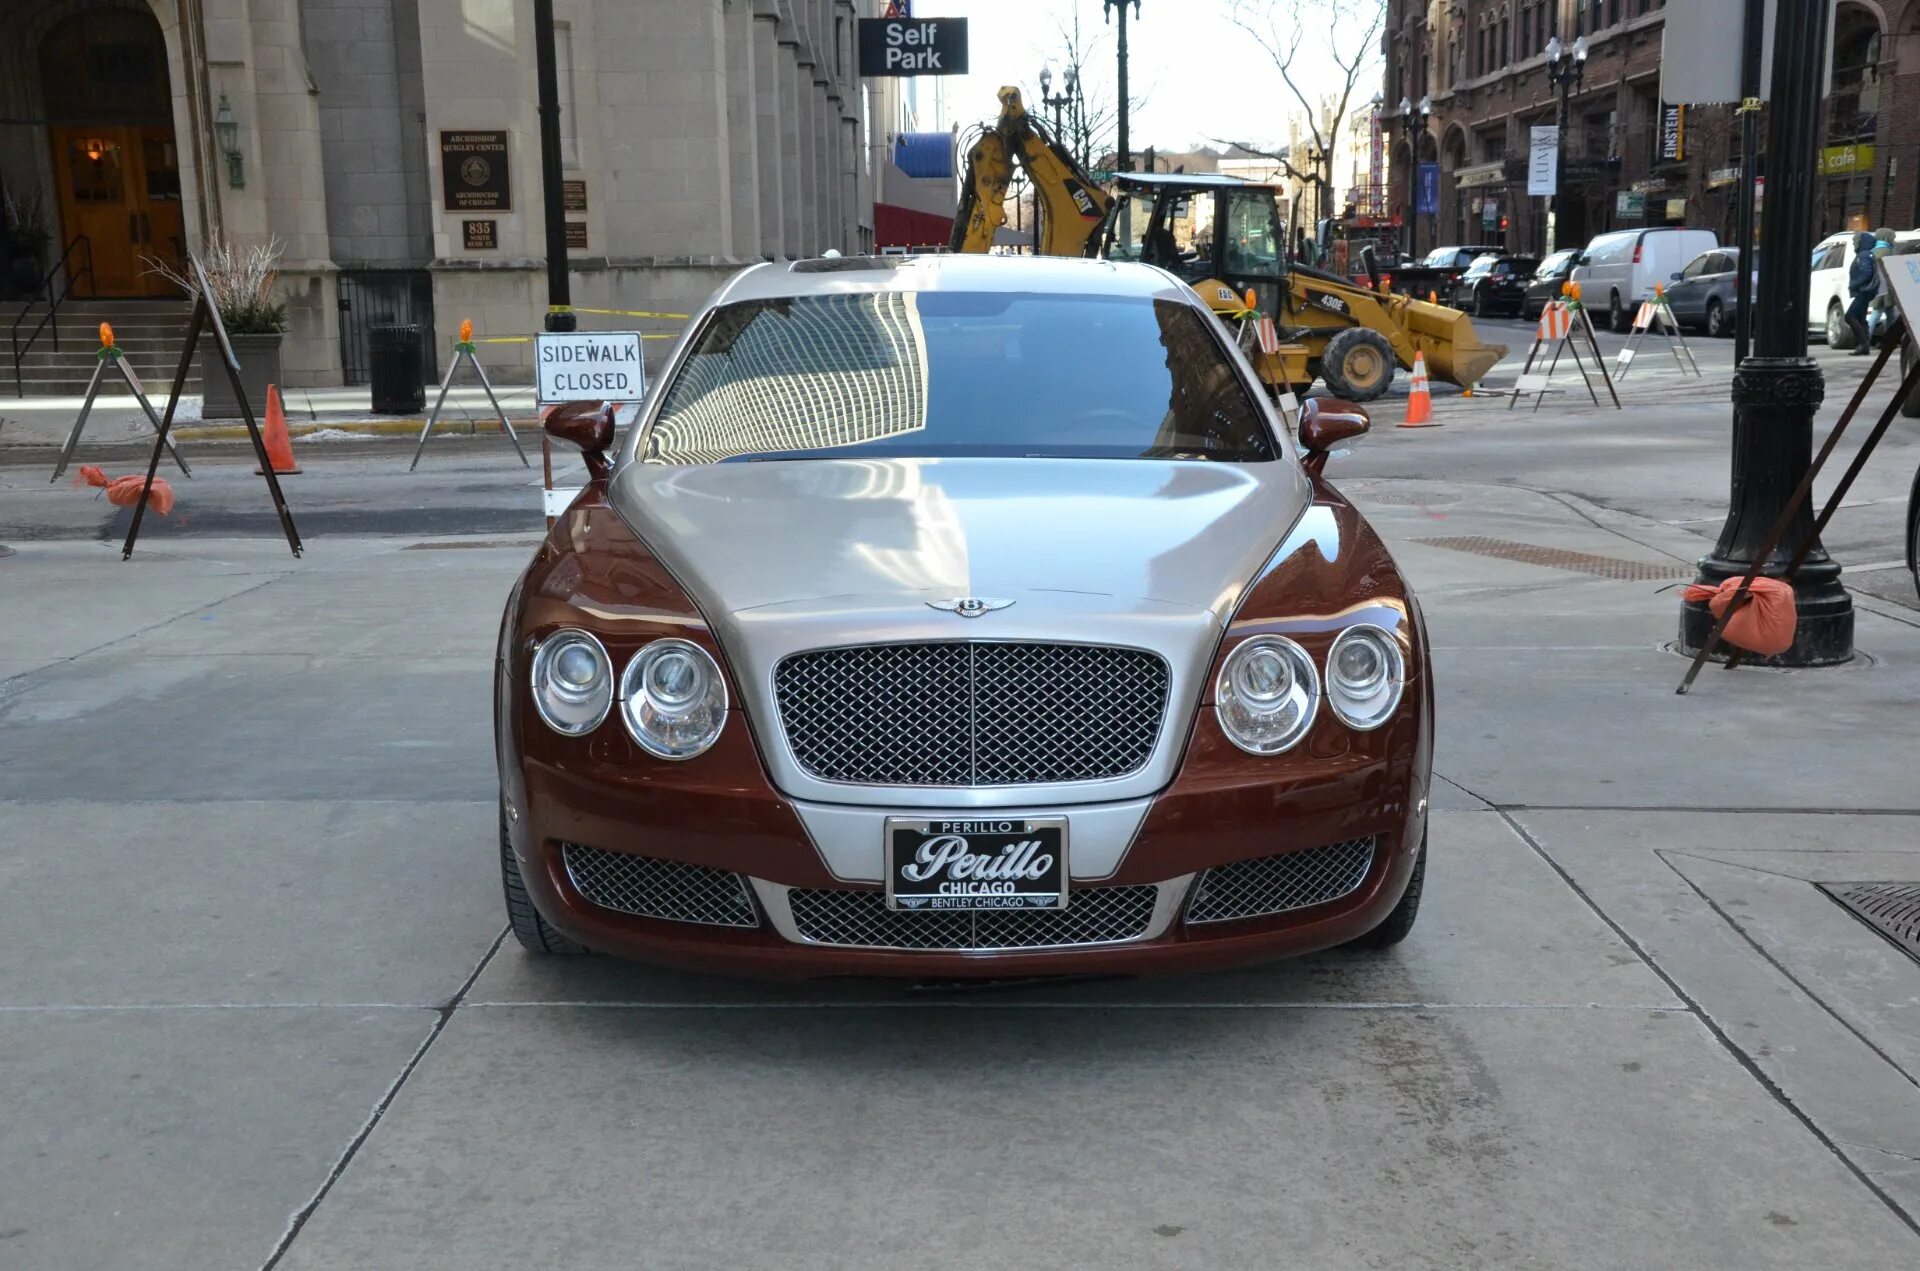 Bentley Flying Spur 2007. Бентли Flying Spur 2007. Бентли Континенталь Flying Spur 2007. Bentley Continental Flying Spur 2007 года. Бентли continental flying spur 2007